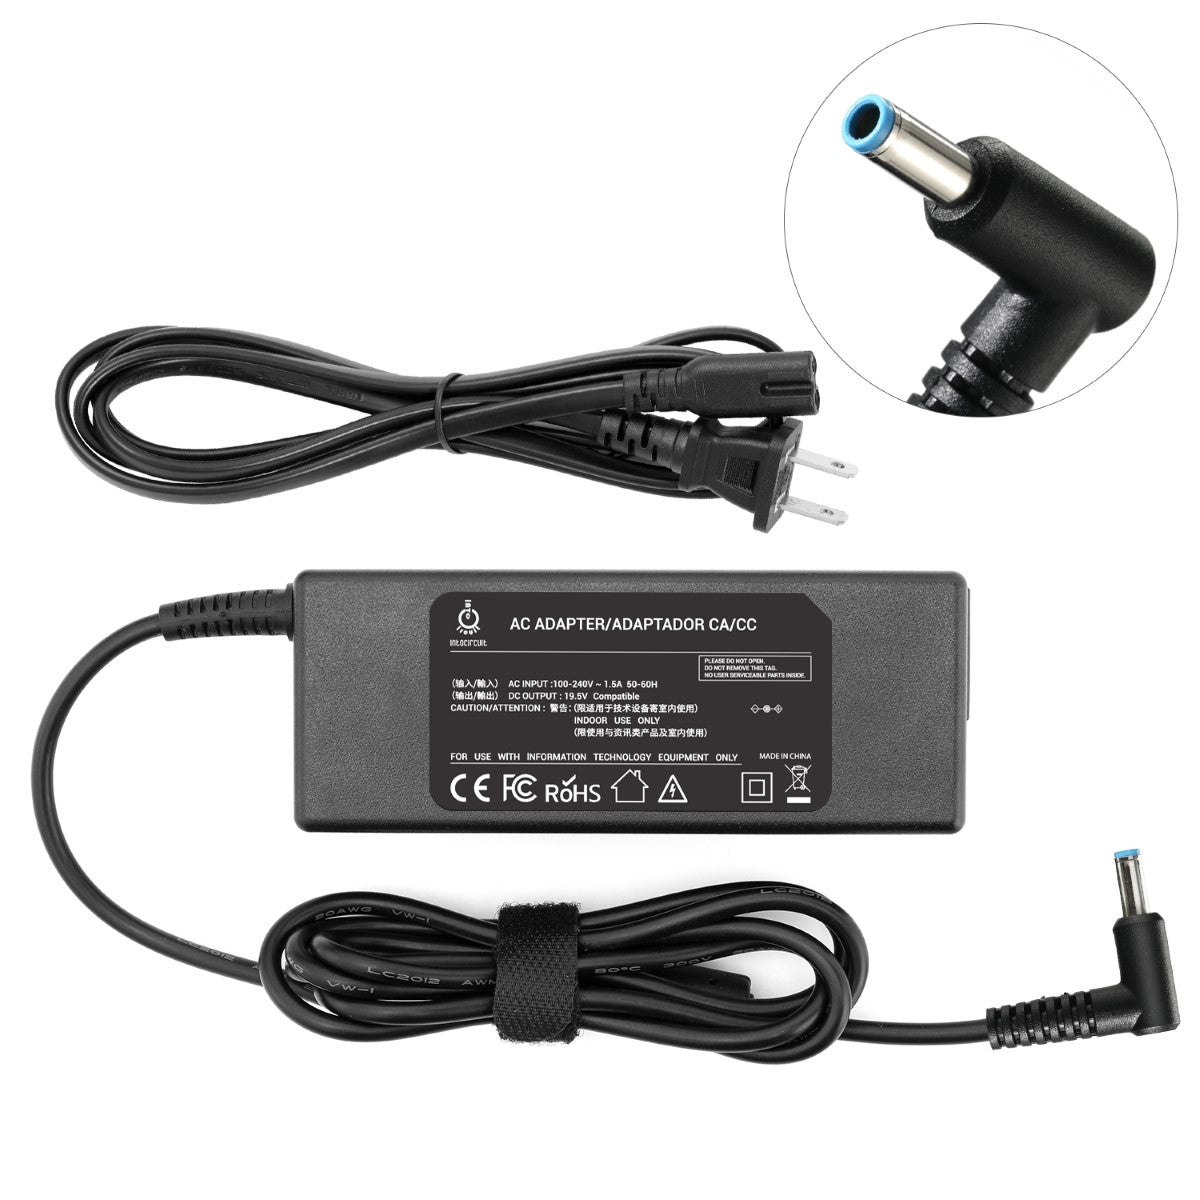 Charger for HP Envy 15-u010dx X360 Convertible Laptop